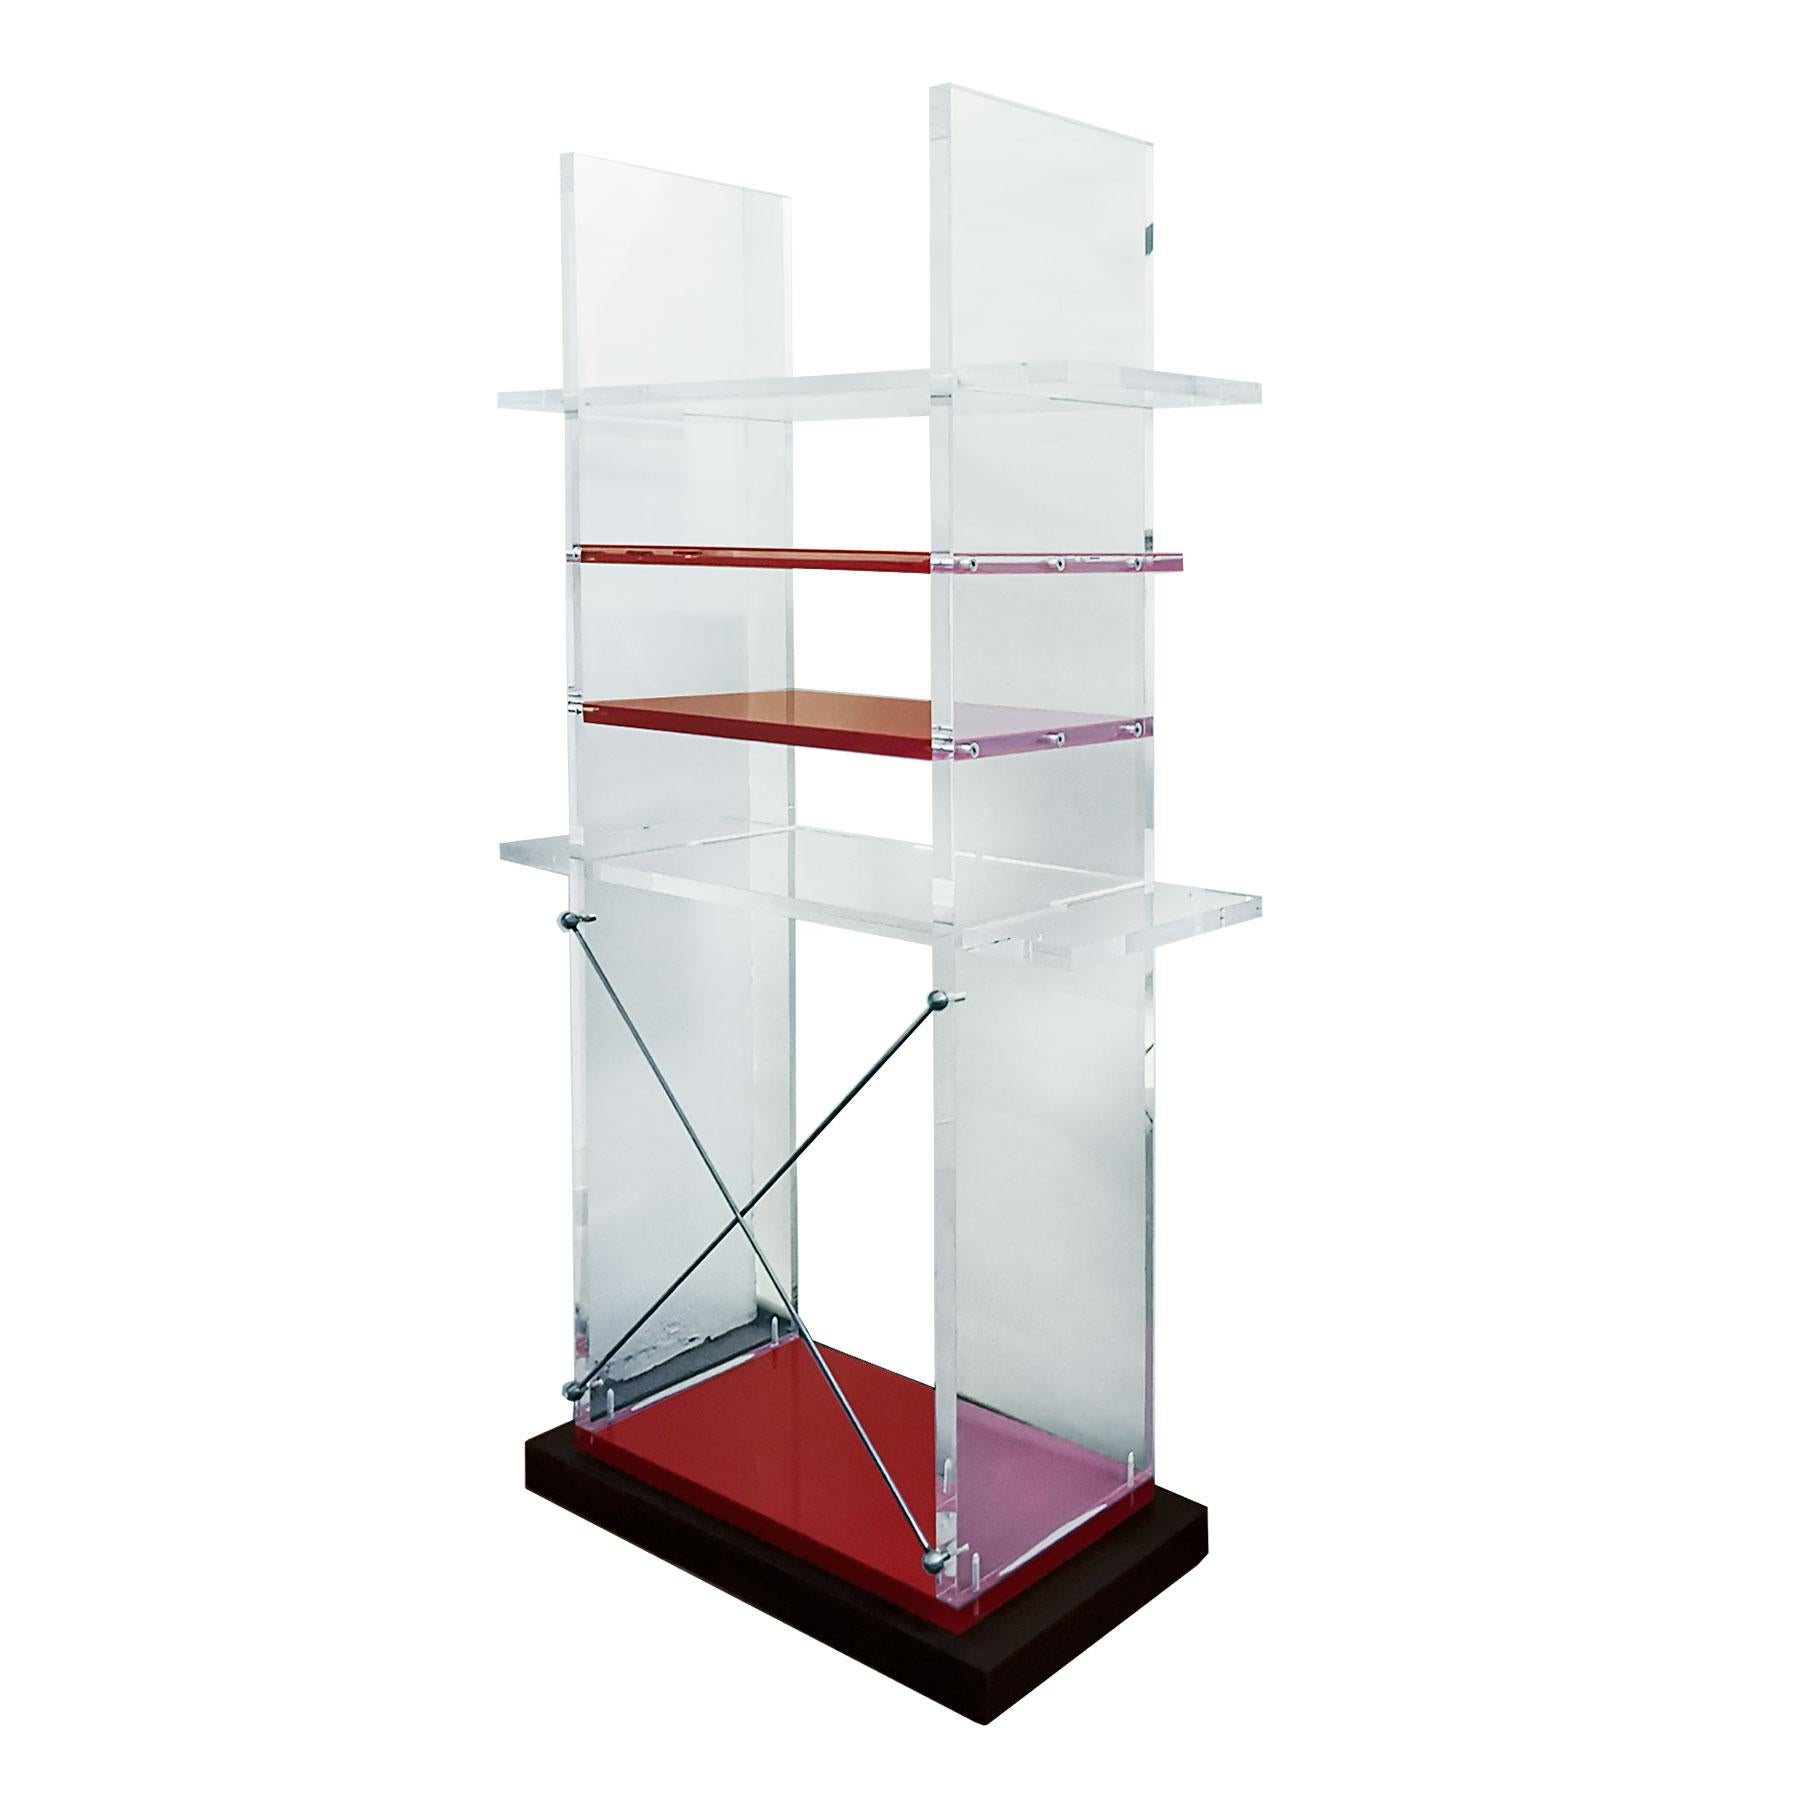 Plated 1980s Pair of Bookcases, Cast Iron, Transparent and Red Thick Plexiglas - Italy For Sale